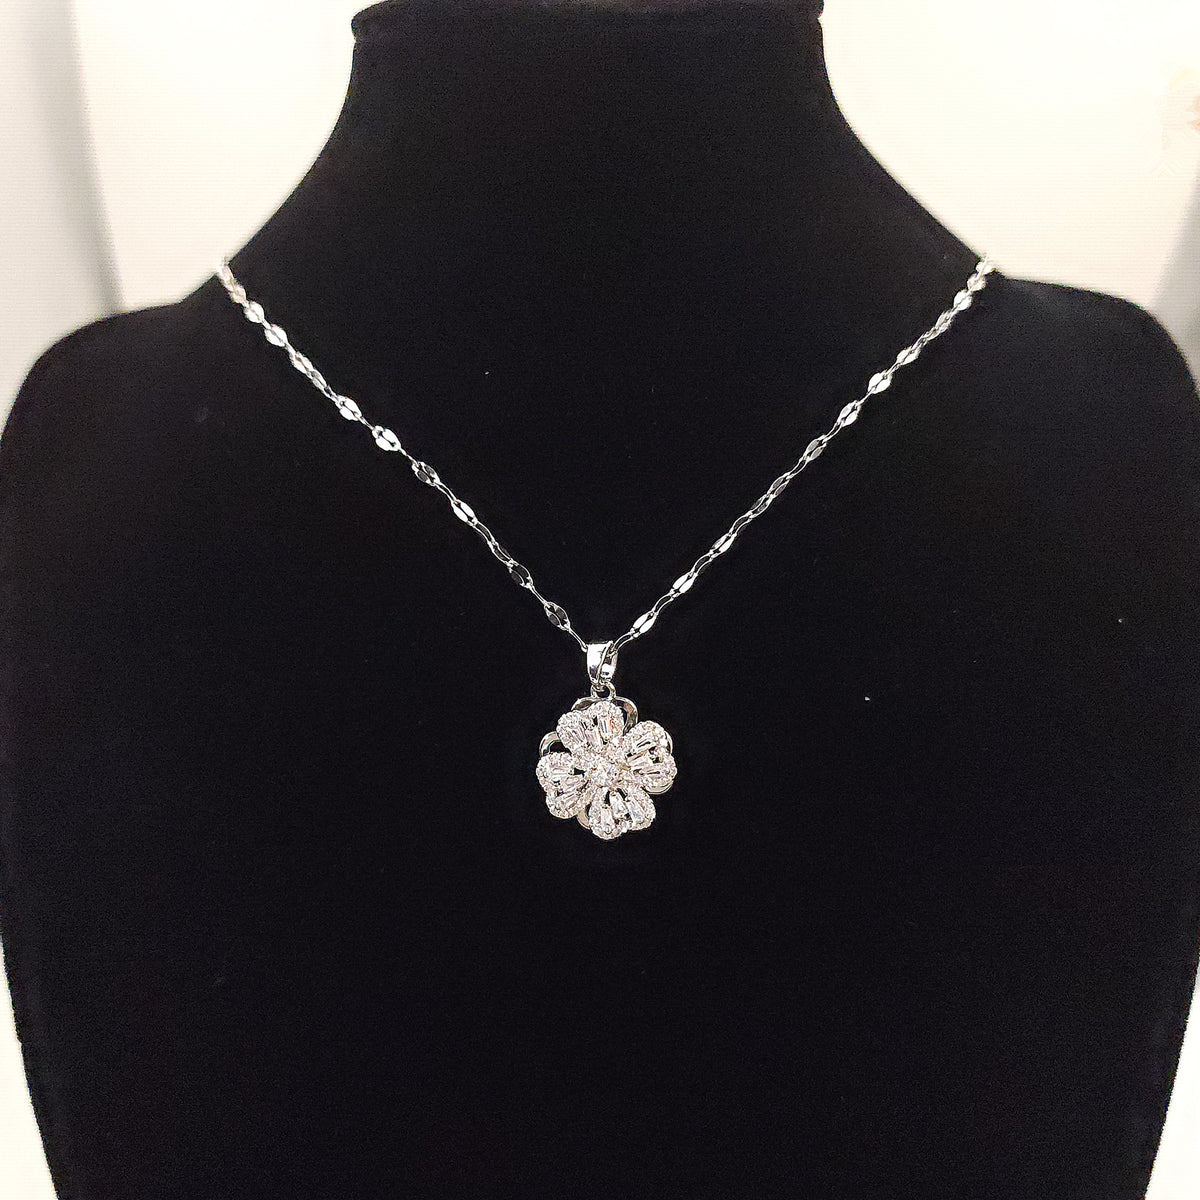 Dainty silver necklace with zircon spinning four leaf clover silver necklace with zircon, delicate necklace| gift for her|spinning pendants